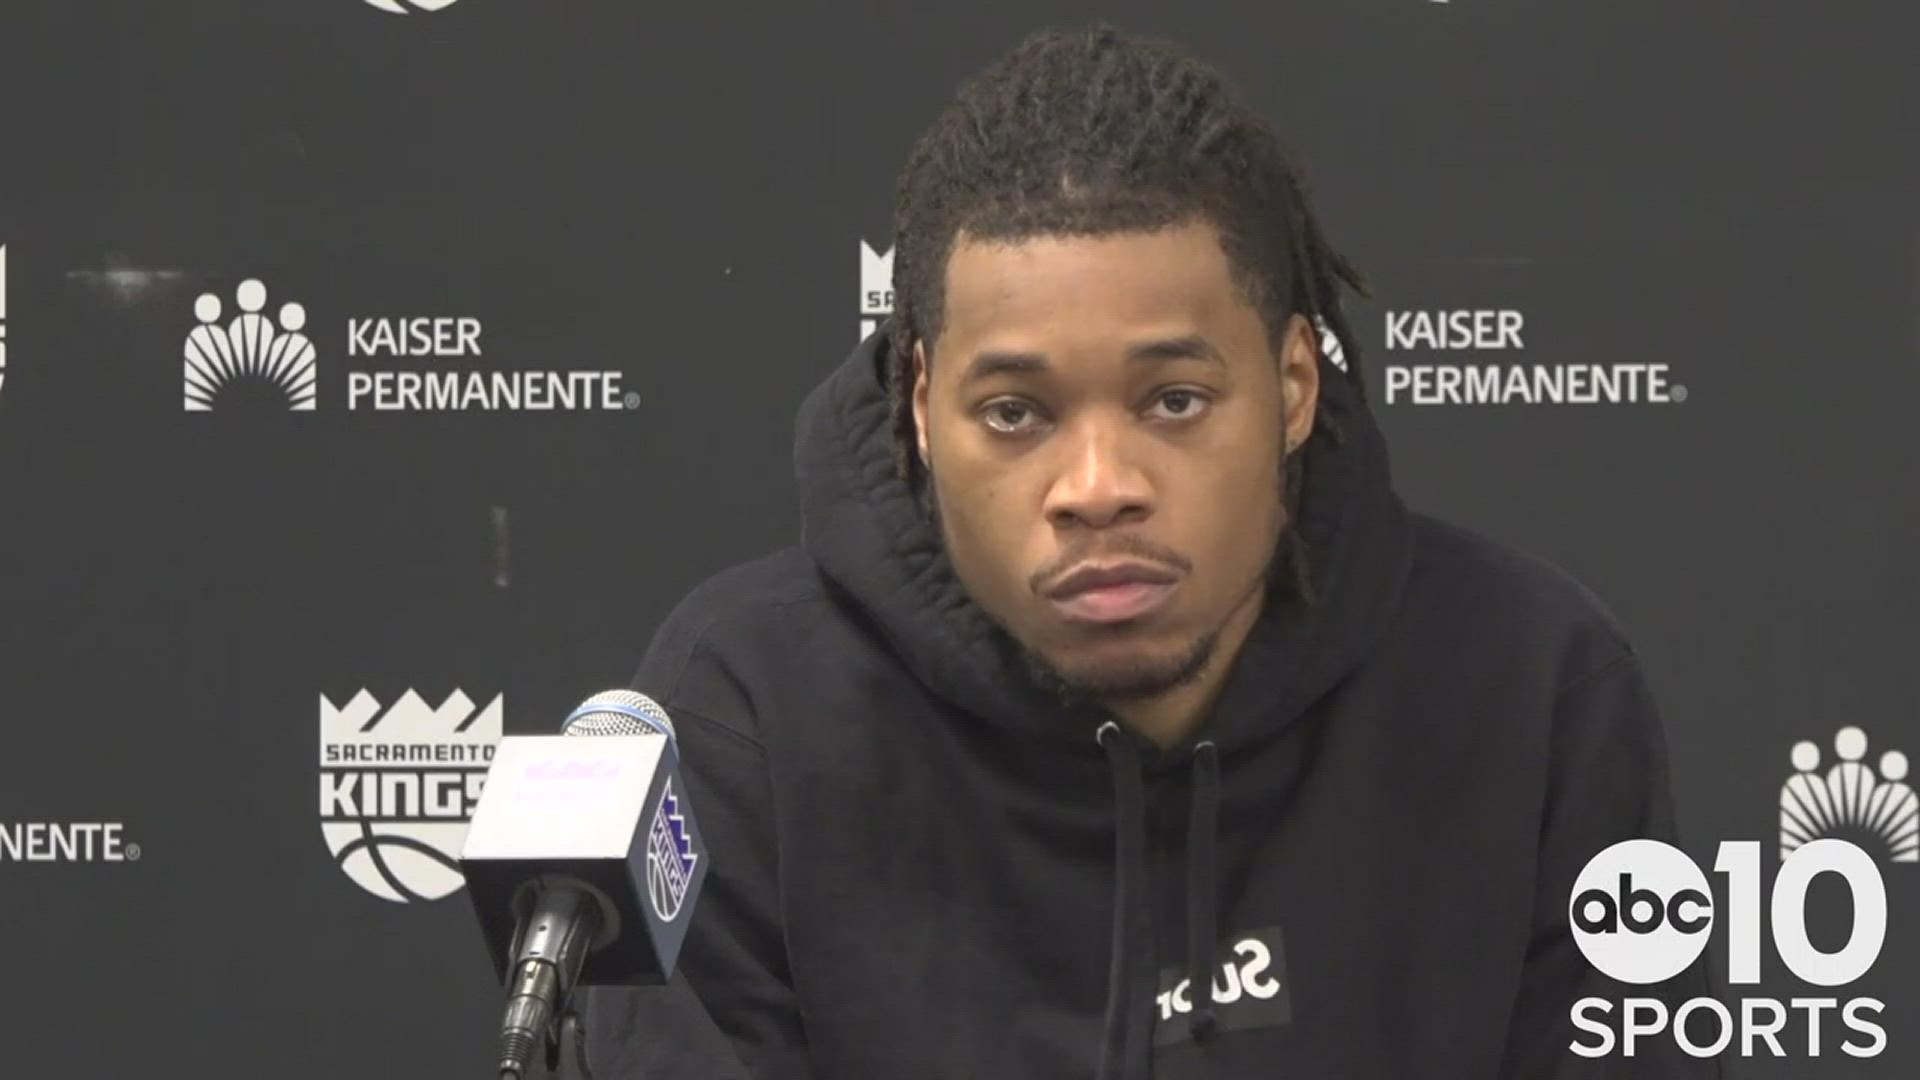 Richaun Holmes talks about his first game back after missing the last eight games after dealing with COVID-19, missing 17 games this season for the Sacramento Kings.